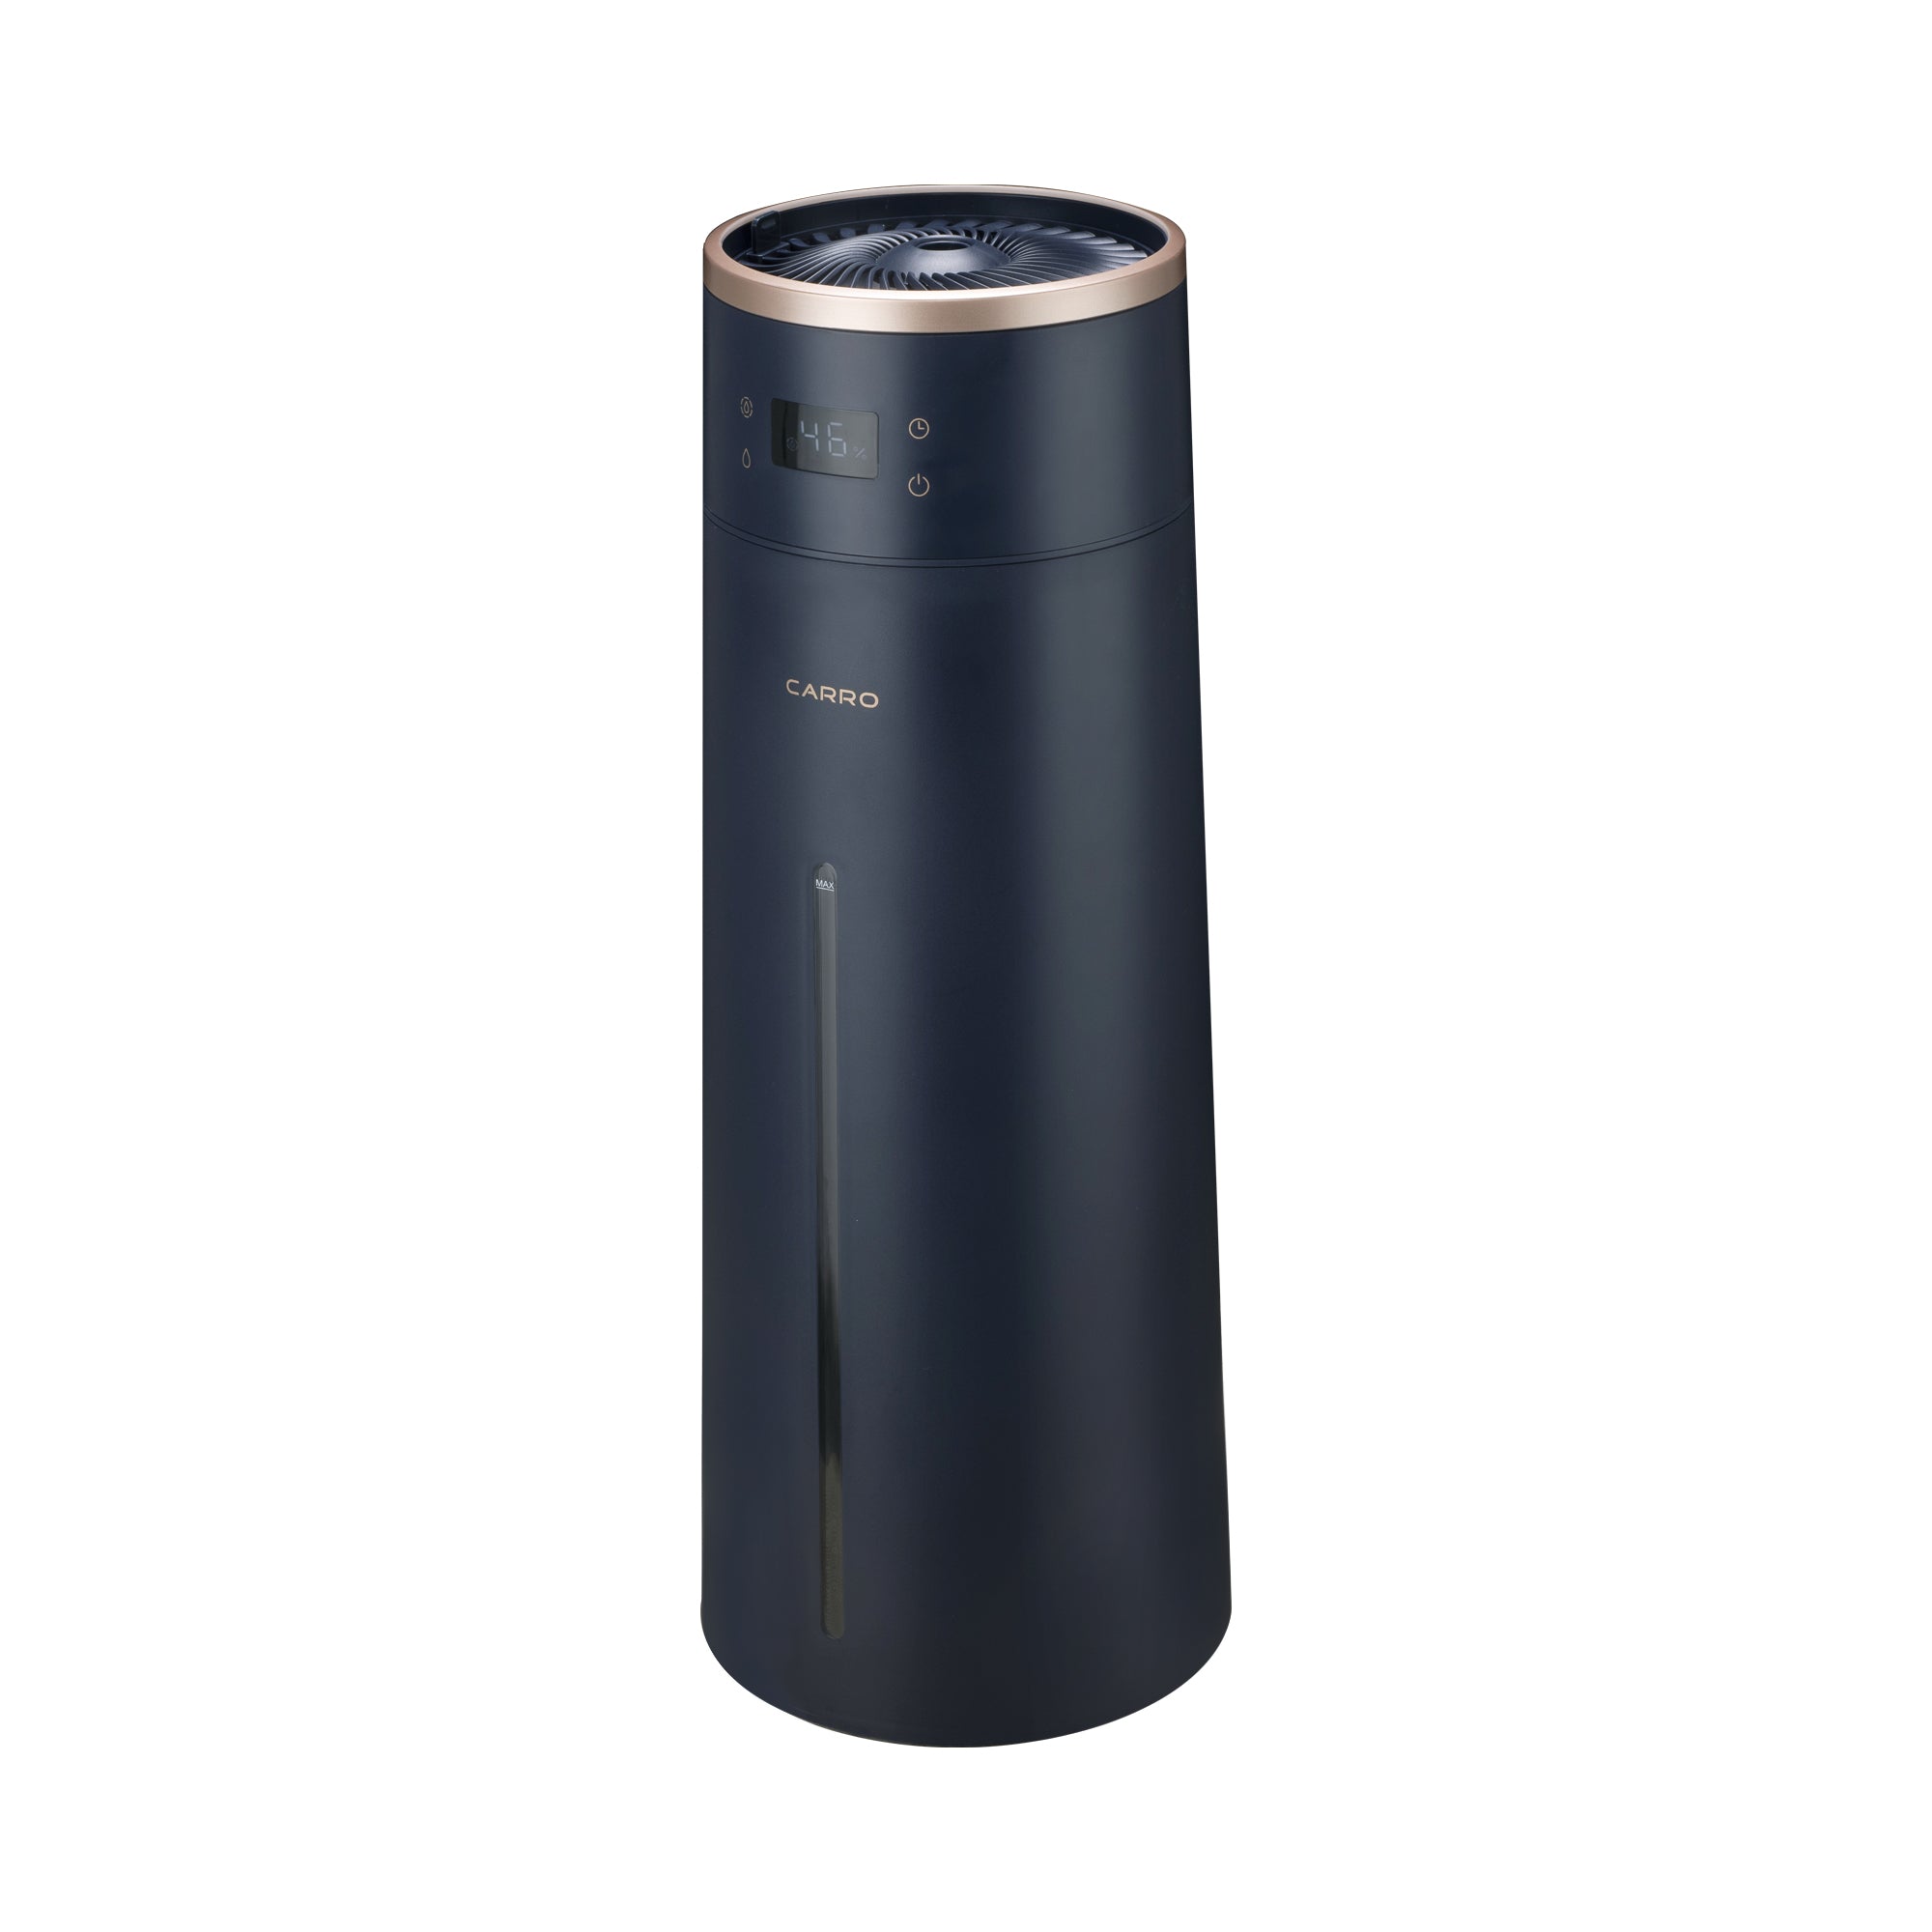 Carro Jacinto Humidifier, with Ultrasonic Technology, quietly disperses a sufficient amount of cool mist into the air providing relief from the dry air. The humidifier is equipped with a 1-8 hours timer and variable touch/APP mist control.  